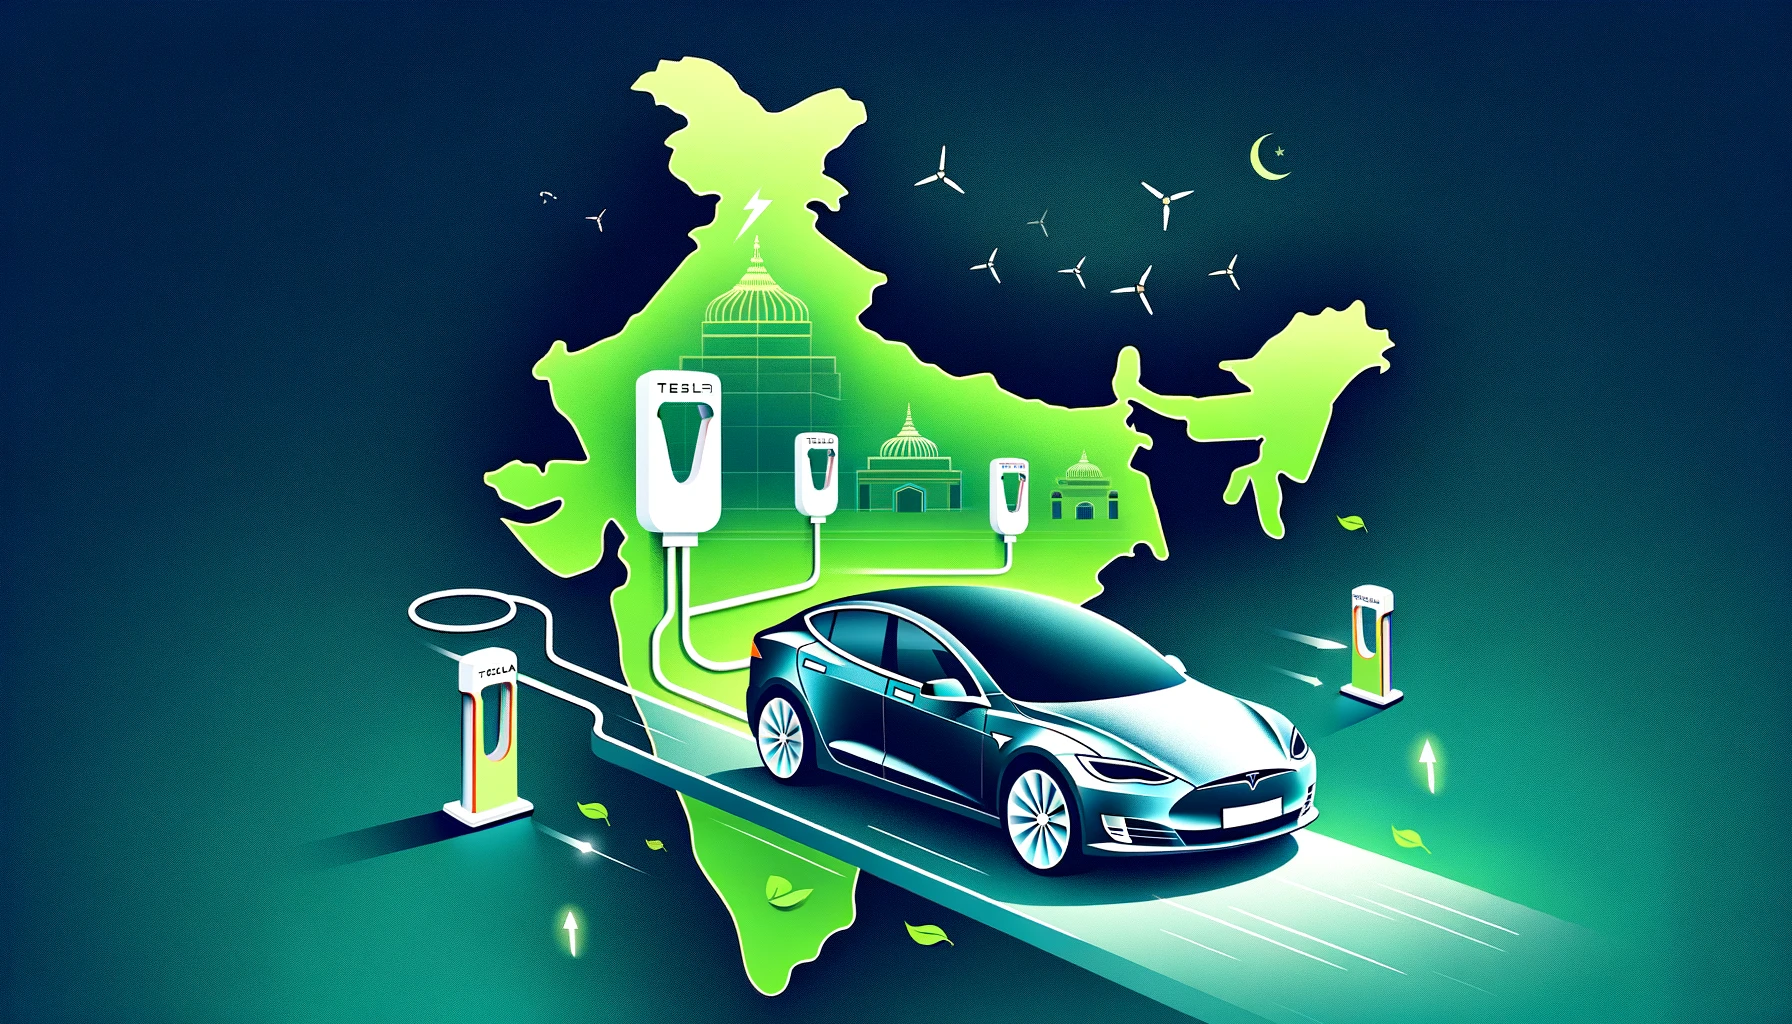 India reduces import duties on electric vehicles, benefiting Tesla’s expansion strategy.